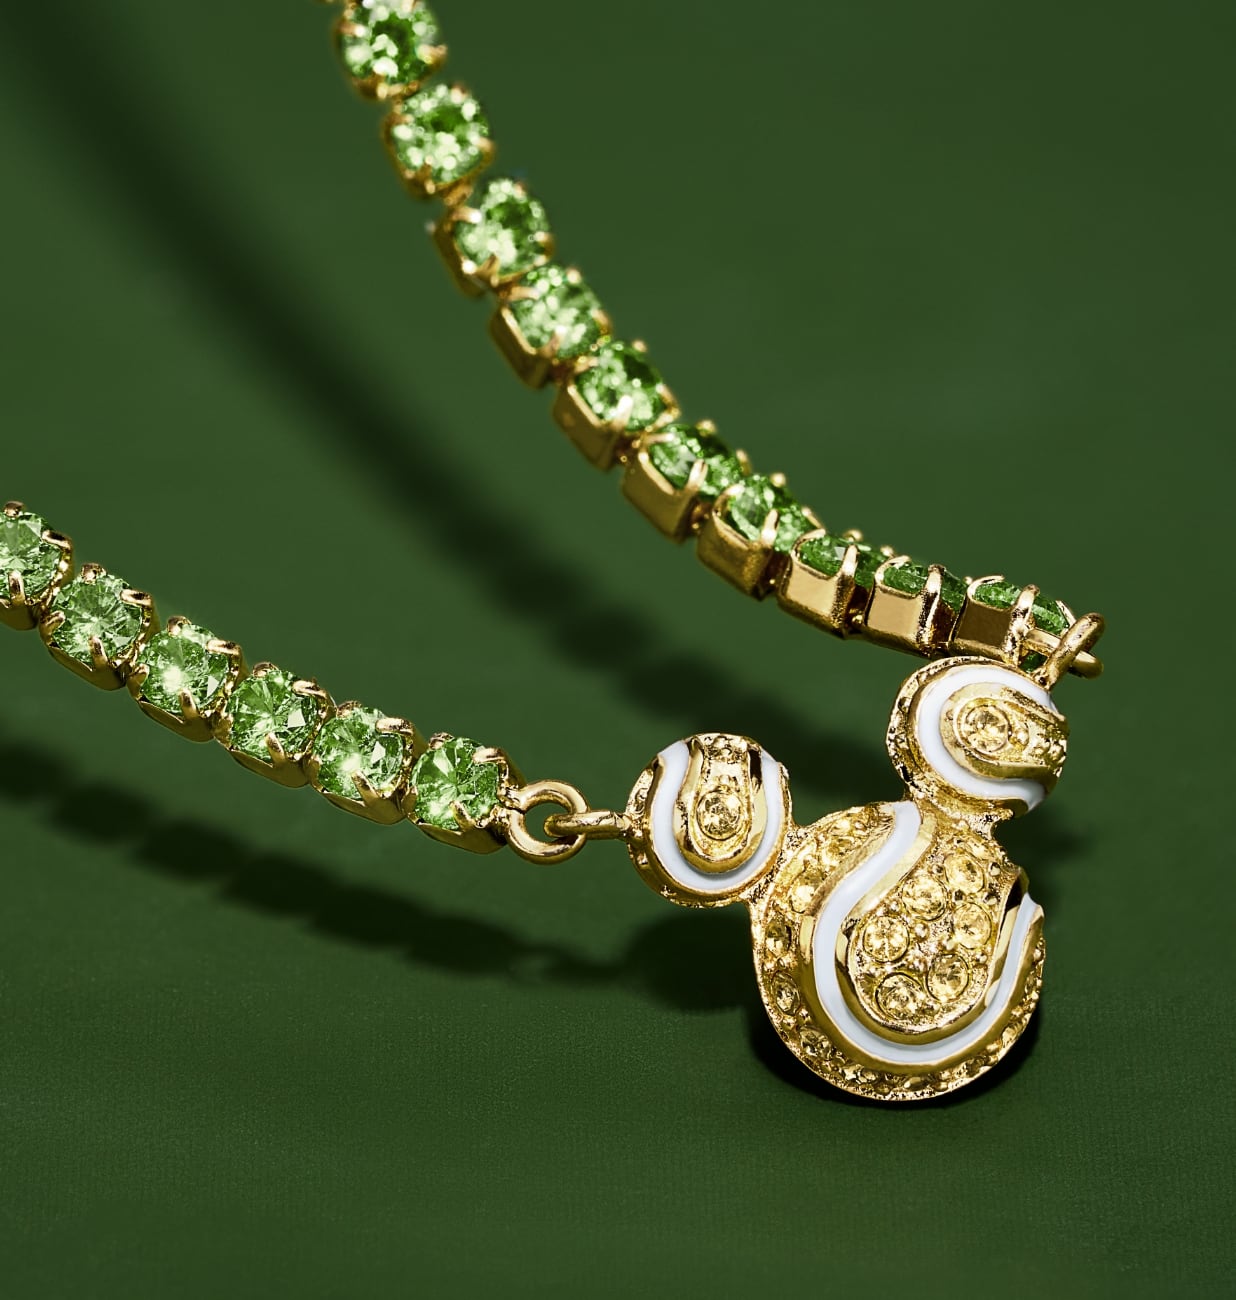 Our Disney Mickey Mouse tennis necklace, embellished with green and yellow pavé crystals. Mickey's silhouette adds a playful accent, reimagined as a sparkling trio of tennis balls.